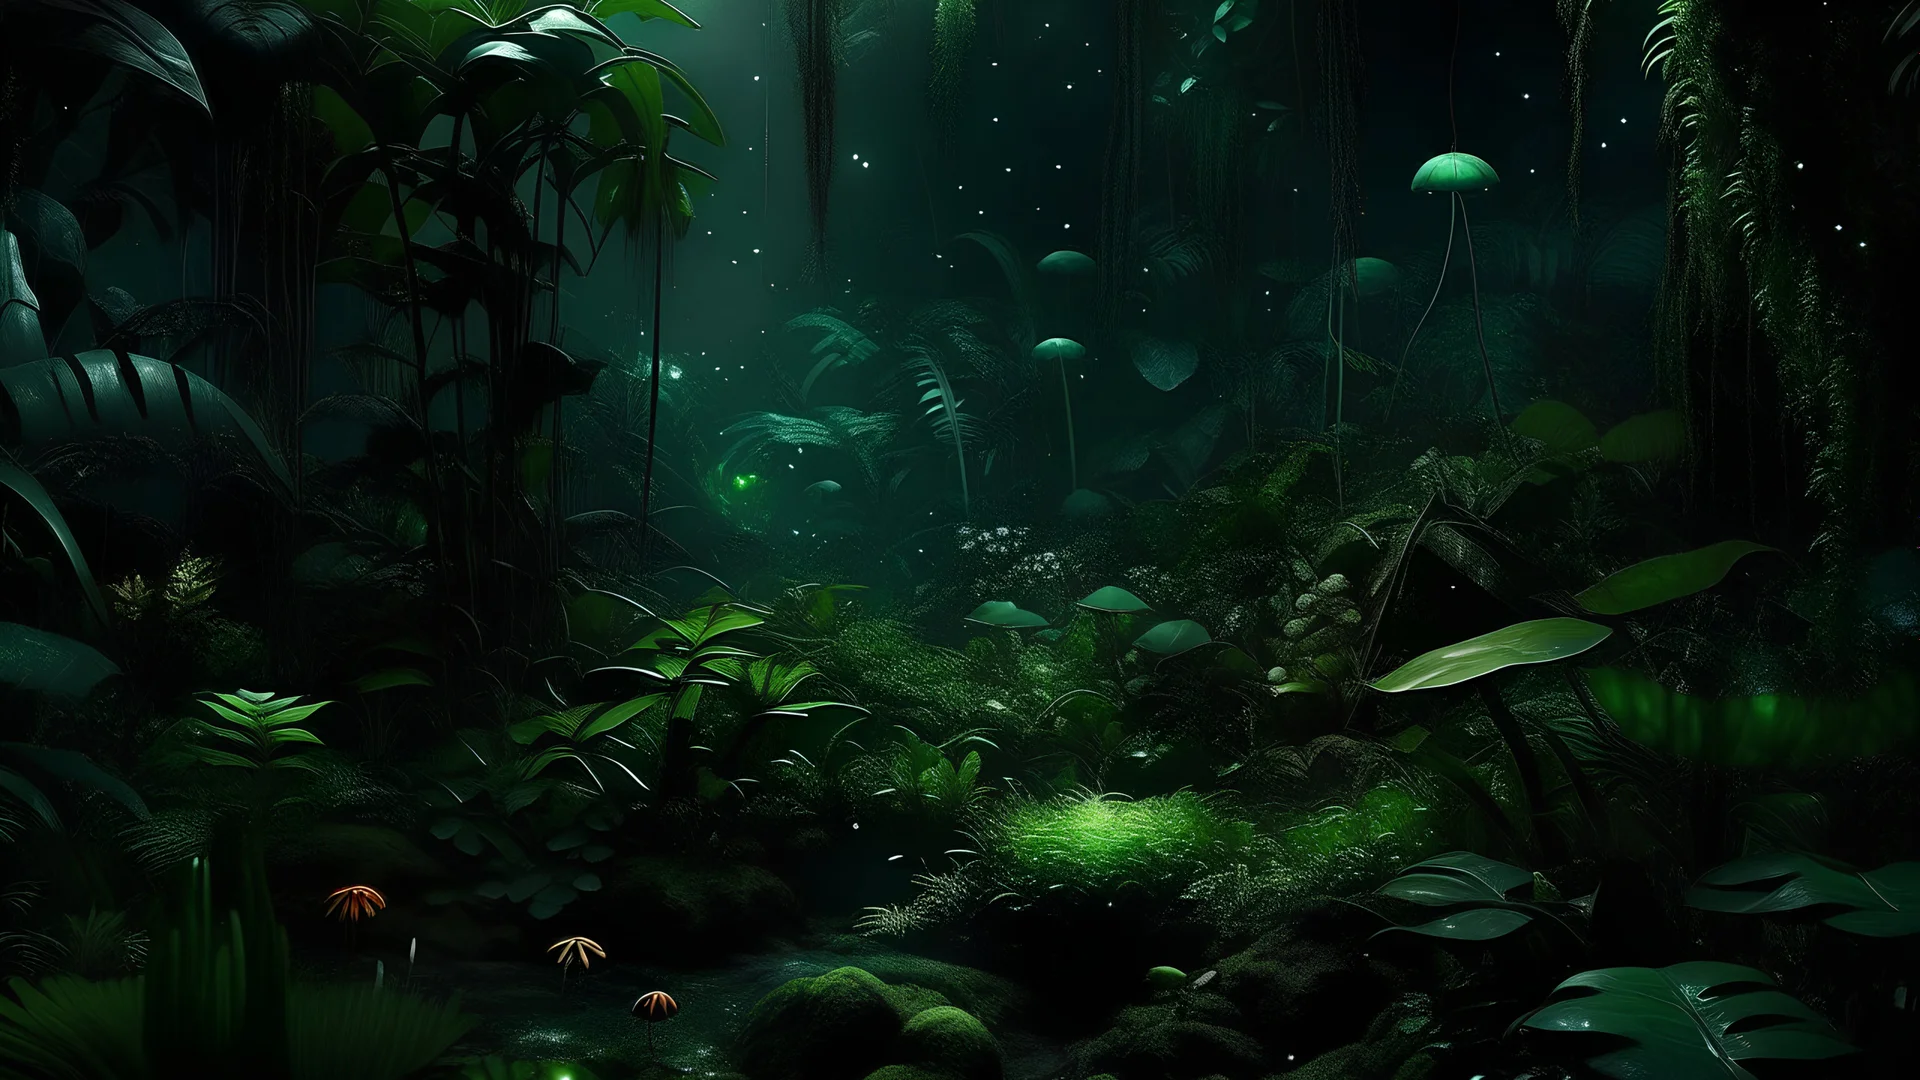 In the jungle garden my mind bows . With the songs of dawn and the sadness of sleep Every leaf - that trembles in the embrace of the green My With dreams, An otherworldly planet, bathed in the cold glow of distant stars. direct view , black , Smoke in the Galaxy.